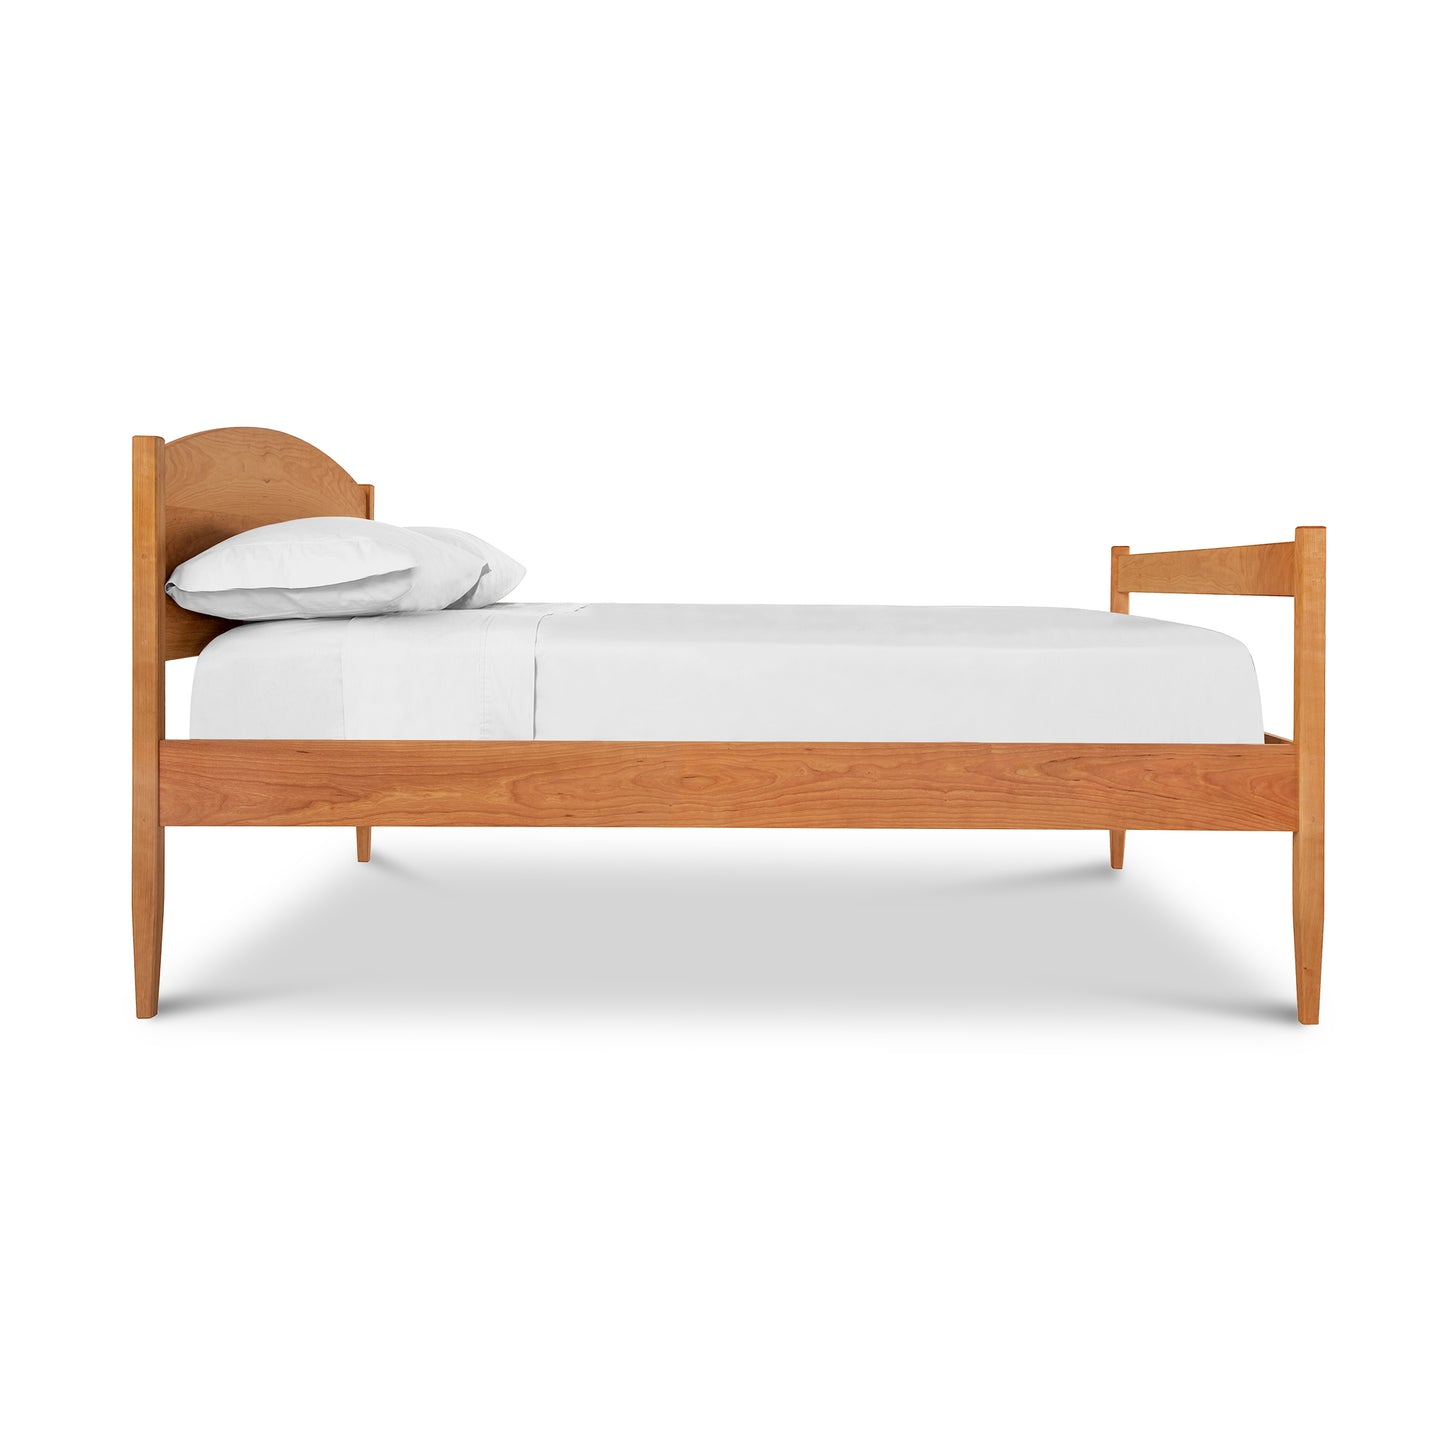 The Maple Corner Woodworks Vermont Shaker Platform Bed, handmade by Vermont furniture makers, showcases the timeless beauty of solid hardwood. Draped with a simple yet elegant white sheet, this bed embodies effortless style and comfort.